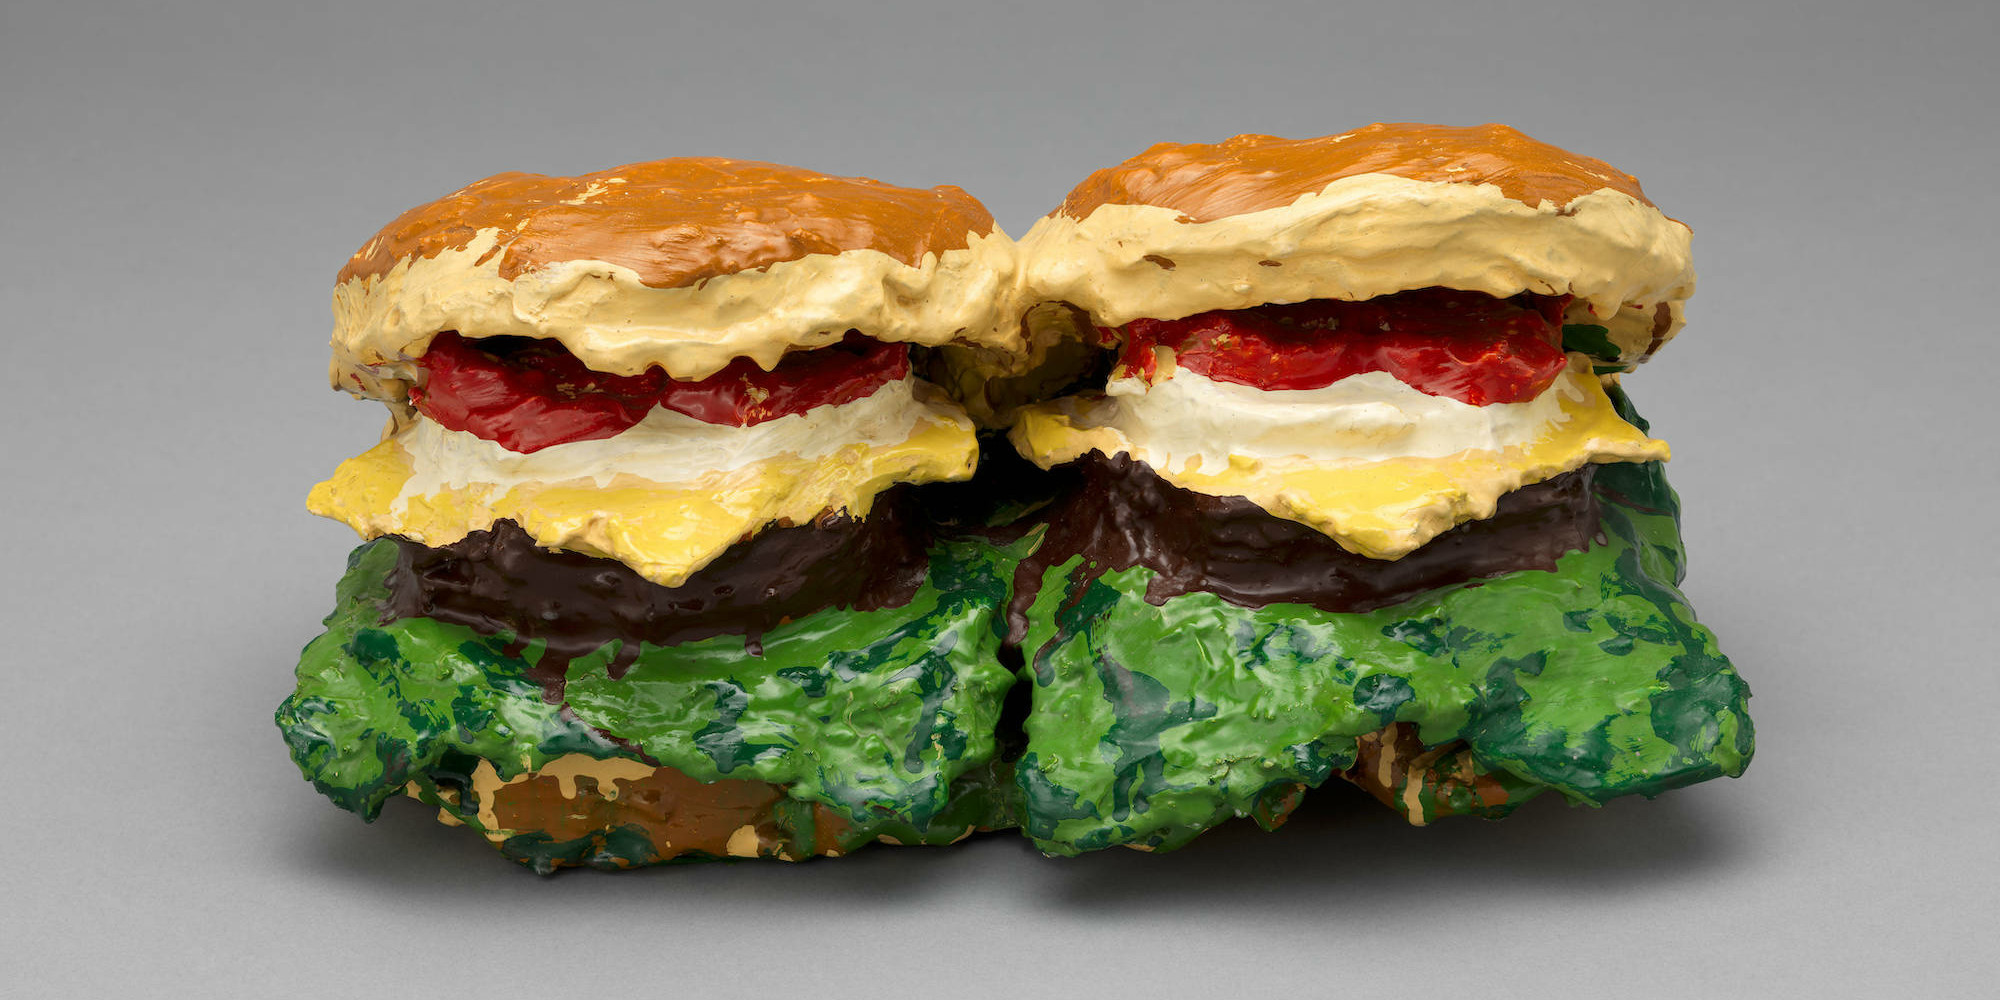 Claes Oldenburg. Two Cheeseburgers, with Everything (Dual Hamburgers). 1962. Burlap soaked in plaster, painted with enamel, 7 × 14 3/4 × 8 5/8&#34; (17.8 × 37.5 × 21.8 cm). The Museum of Modern Art, New York. Philip Johnson Fund. © 2022 Claes Oldenburg